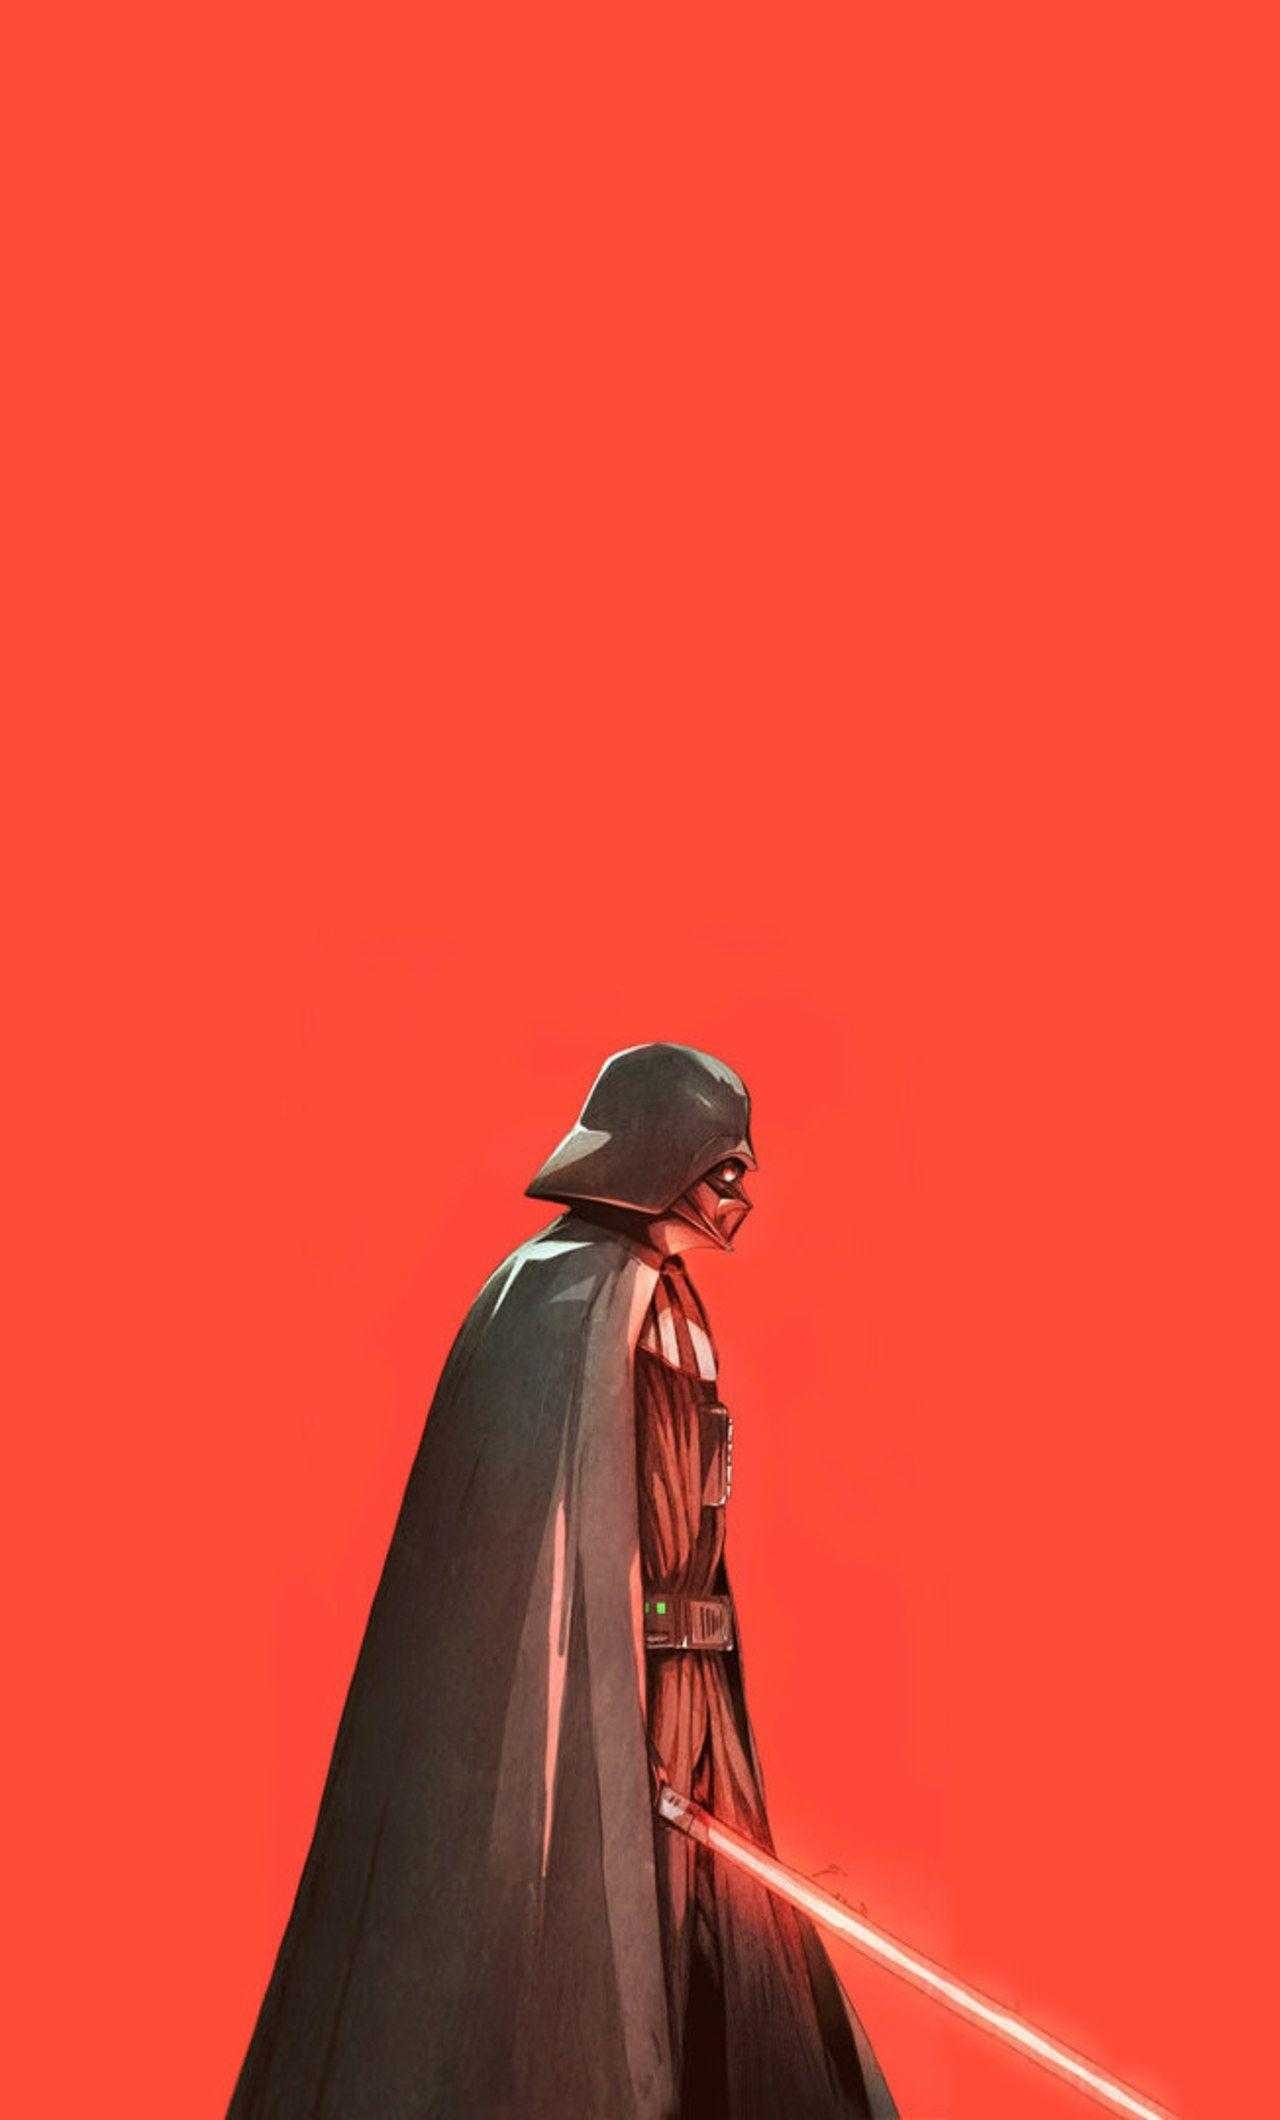 Darth Vader: Was severely injured and burned on the banks of a lava river. 1280x2120 HD Wallpaper.